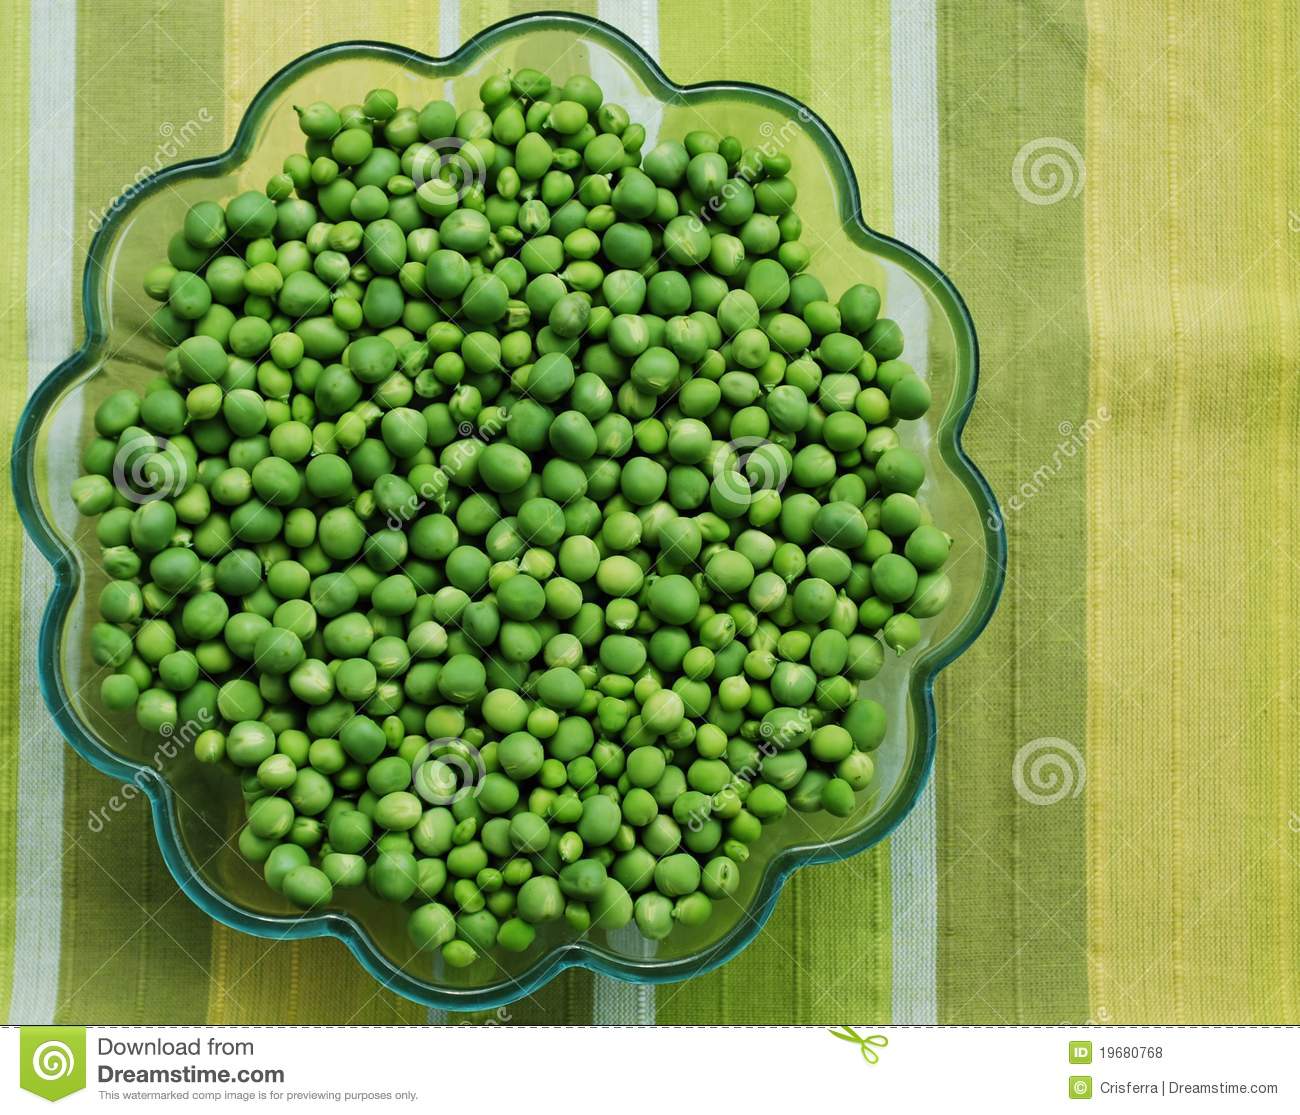 Peas In A Bowl Royalty Free Stock Photos   Image  19680768